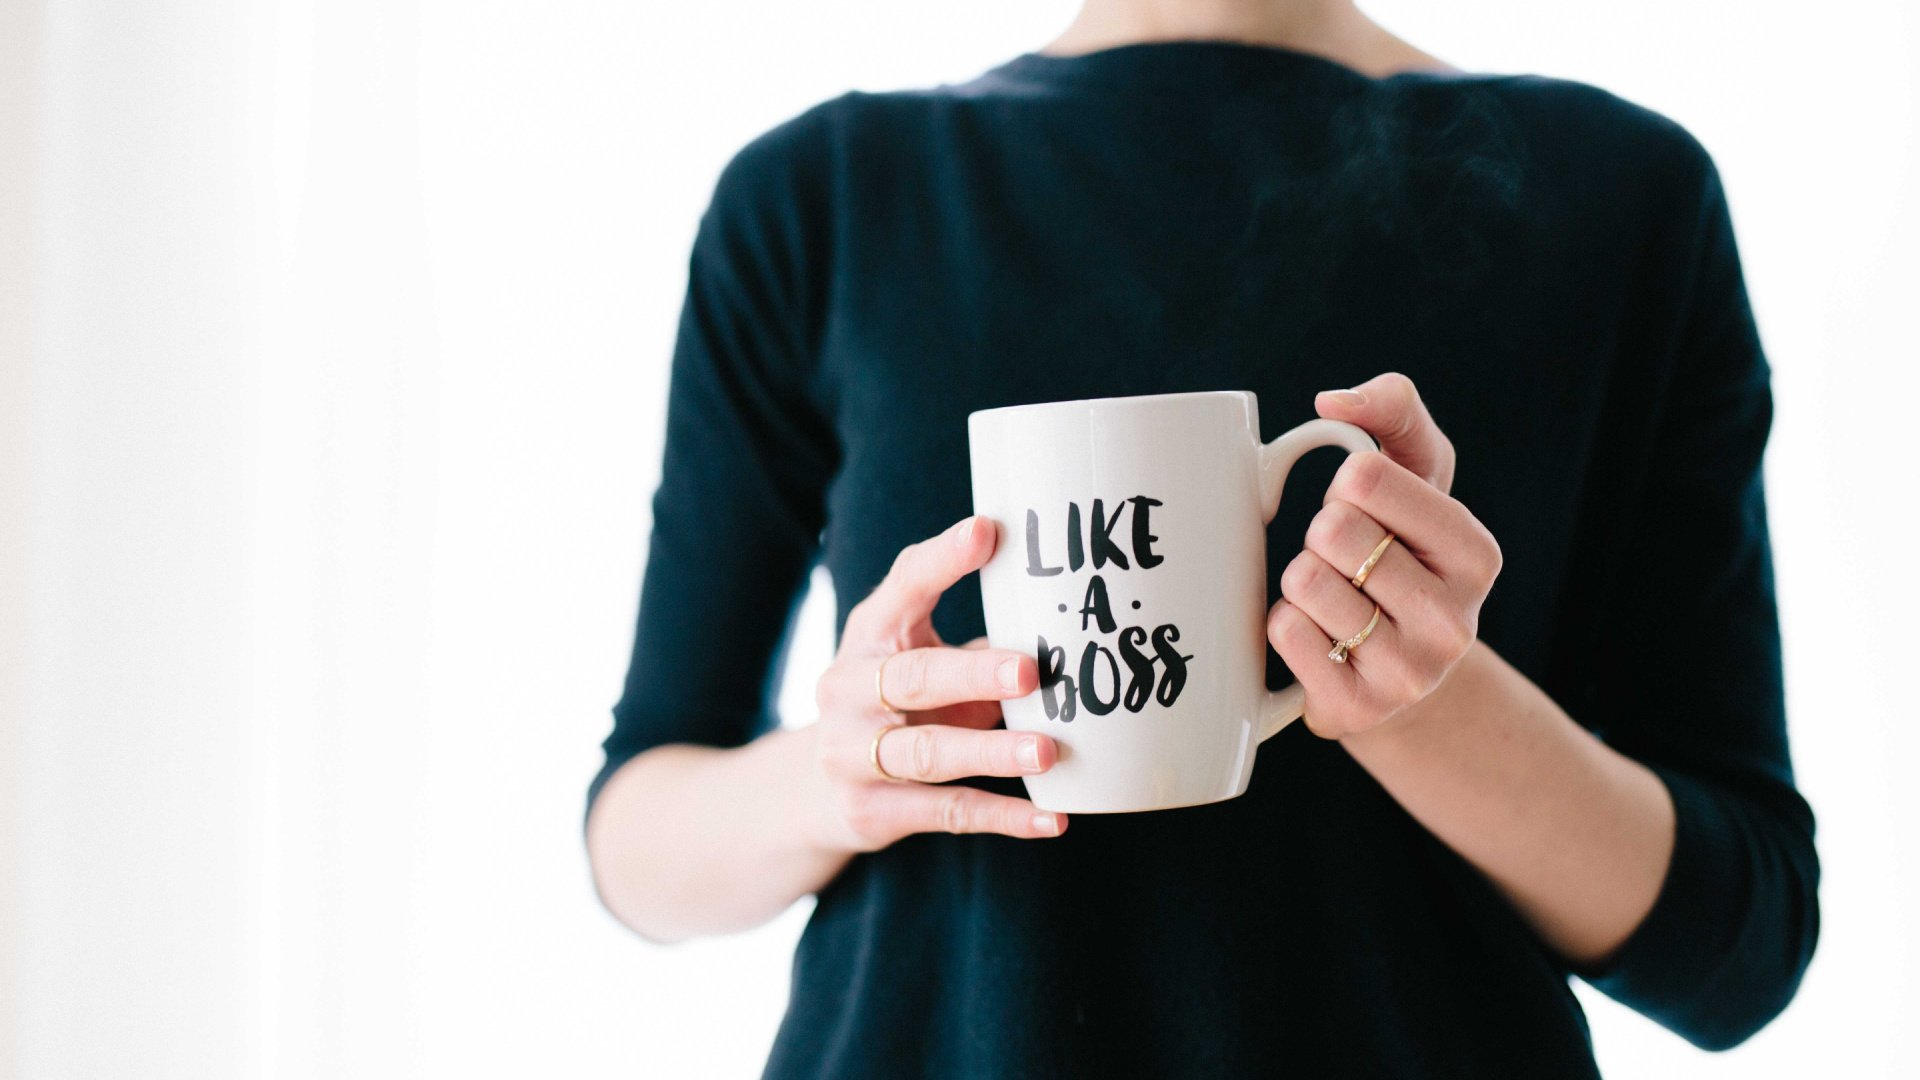 Person holding a coffee mug with text on it that says "like a boss"